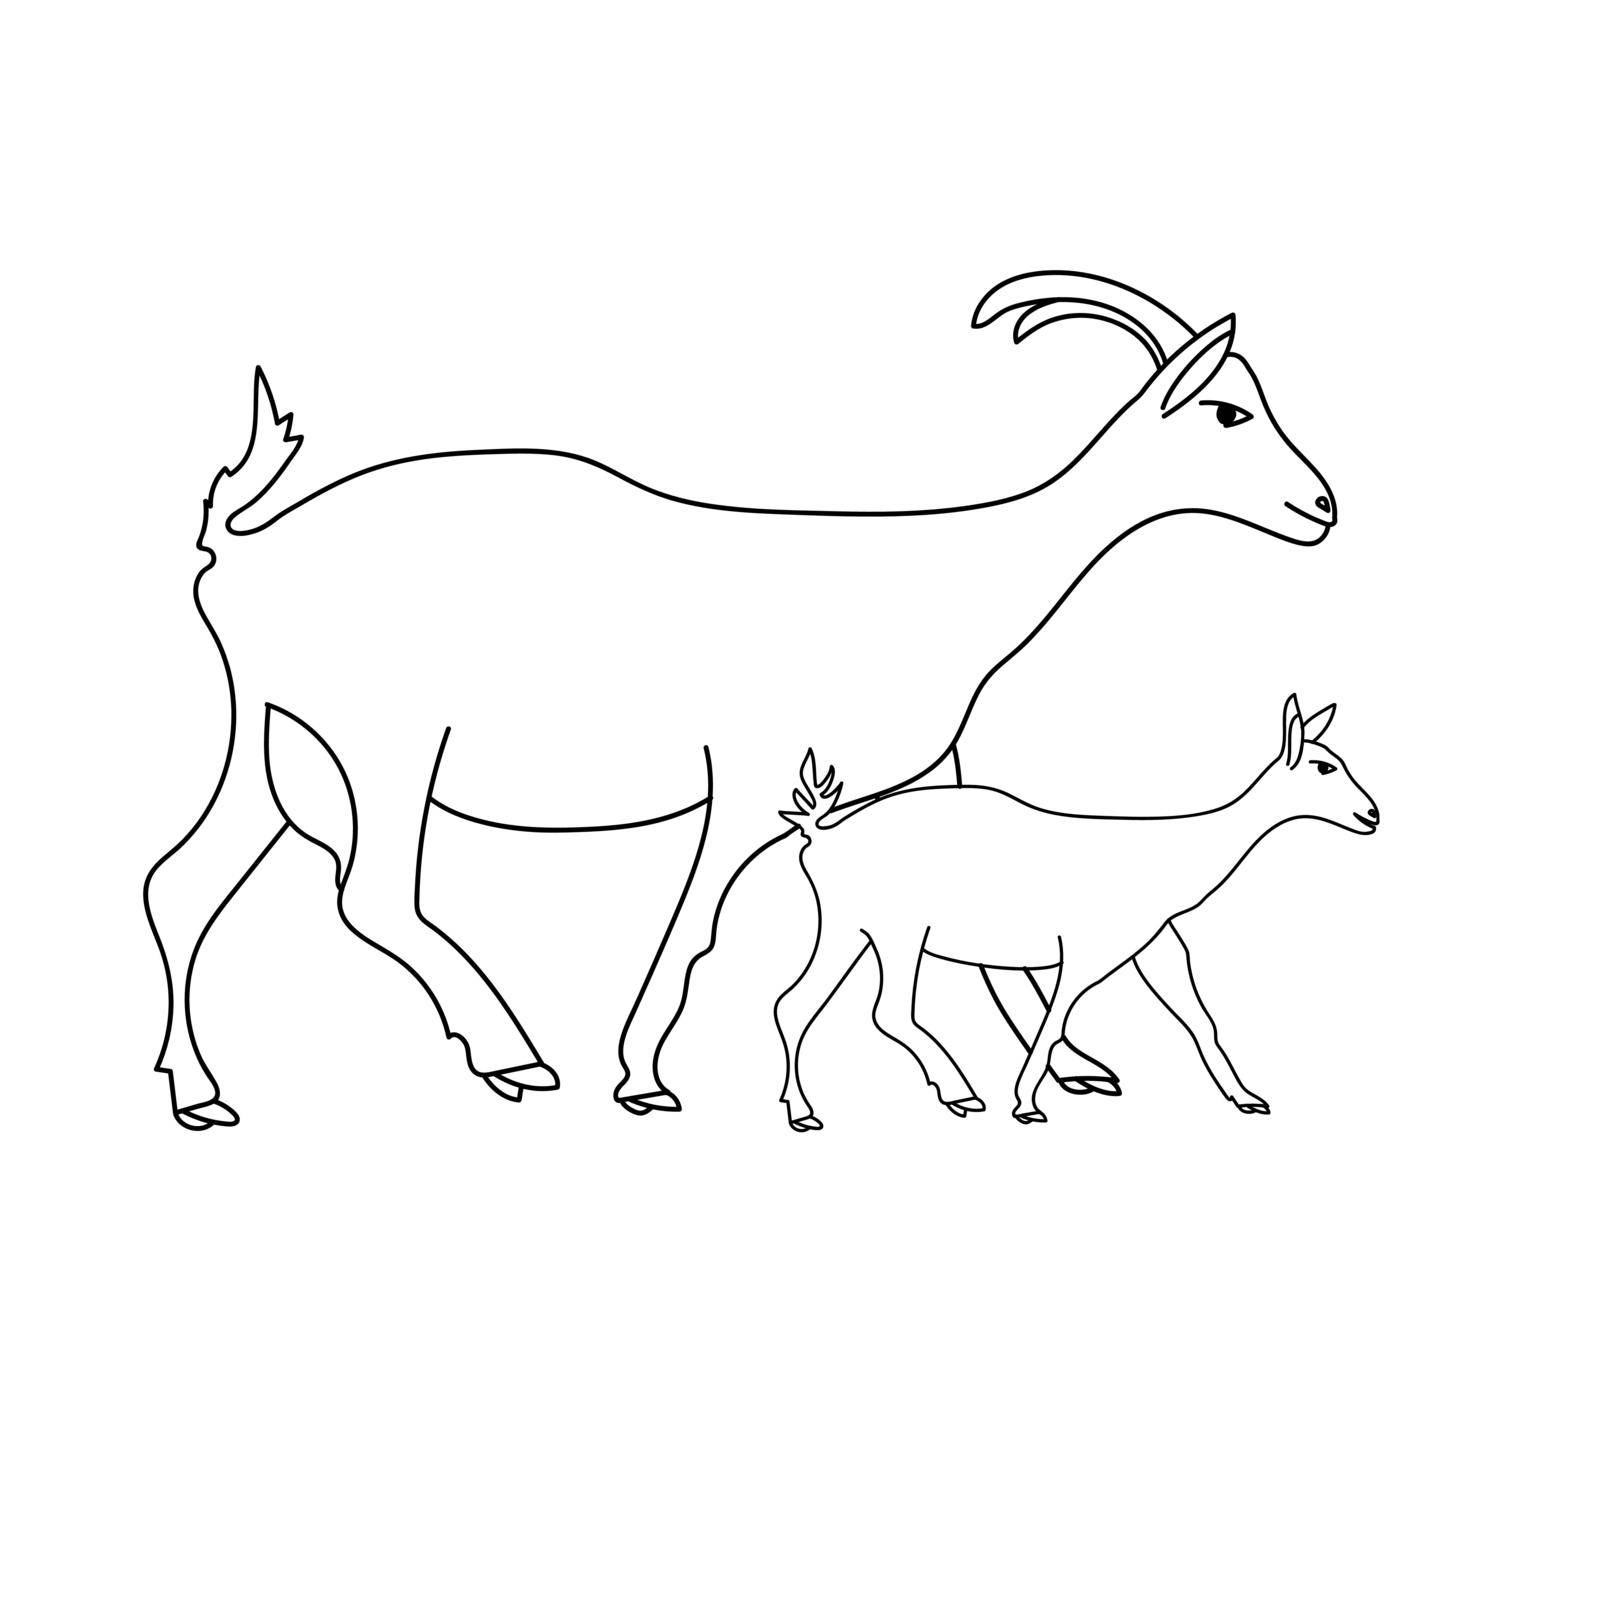 Goat and kid, mom and baby animals, coloring book page for children learning, pets vector outline illustration by Sunny_Coloring